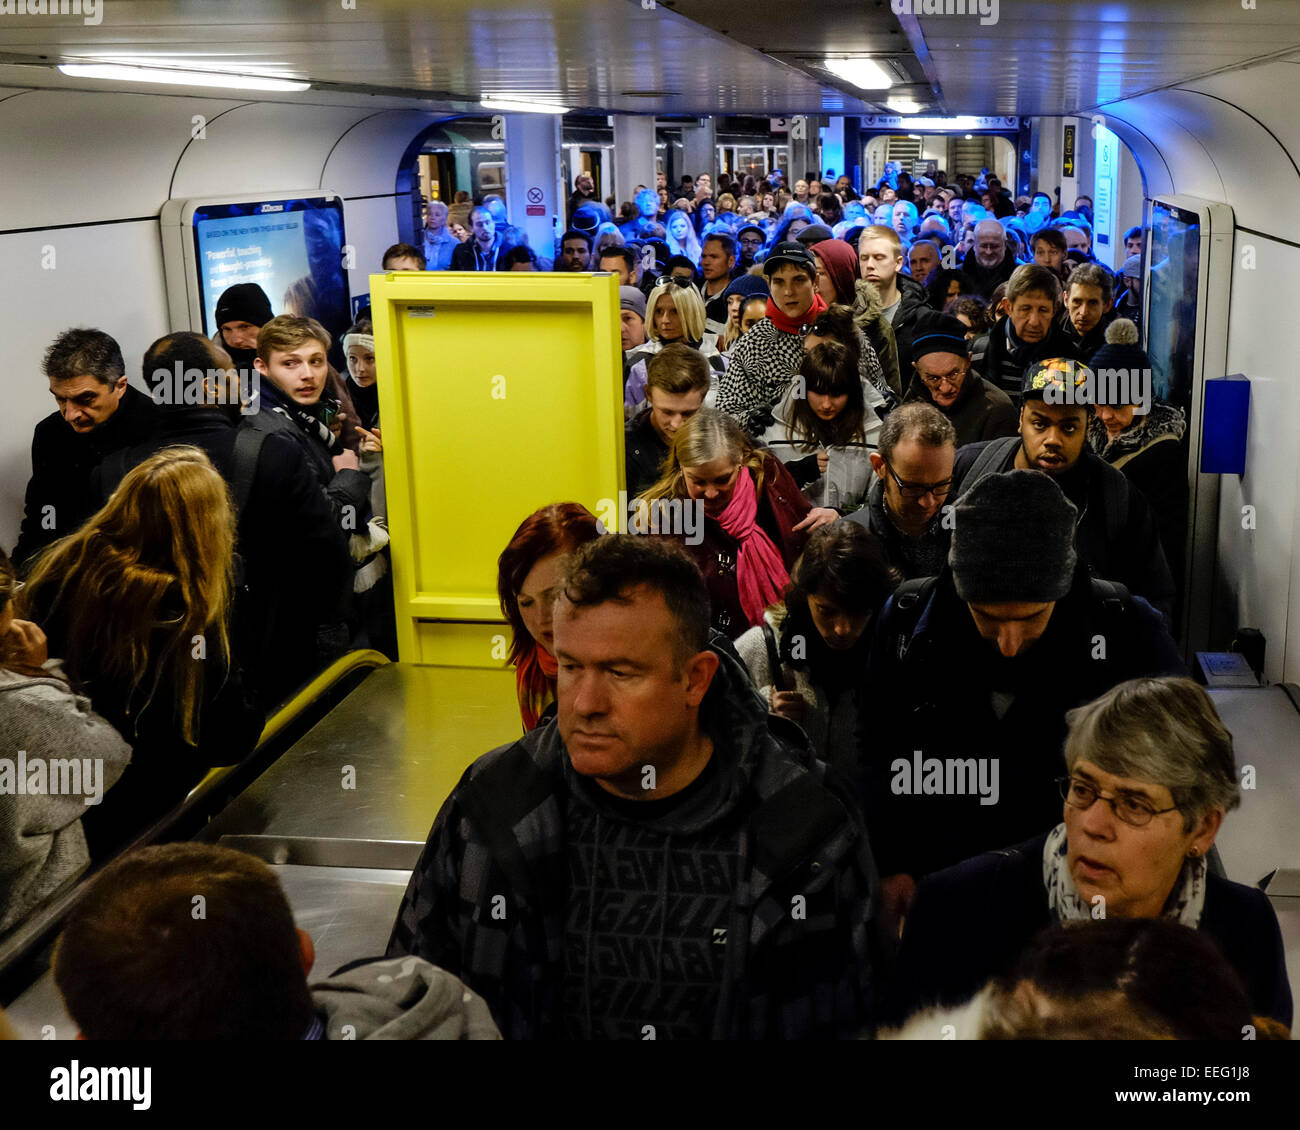 Gatwick Airport, London, UK. 17th Jan, 2015. Southern Rail chaos. The troubled Southern Rail line was thrown into more chaos today as a signaling fault at Three Bridges occurred at the same time as engineering works were taking place on the line. Travelers trying to get from London to the south coast were asked to use at least 3 trains before getting a rail replacement bus service. Pictures show crowds at Gatwick Airport trying to find a way to continue their journey. Credit:  JEP News/Alamy Live News Stock Photo